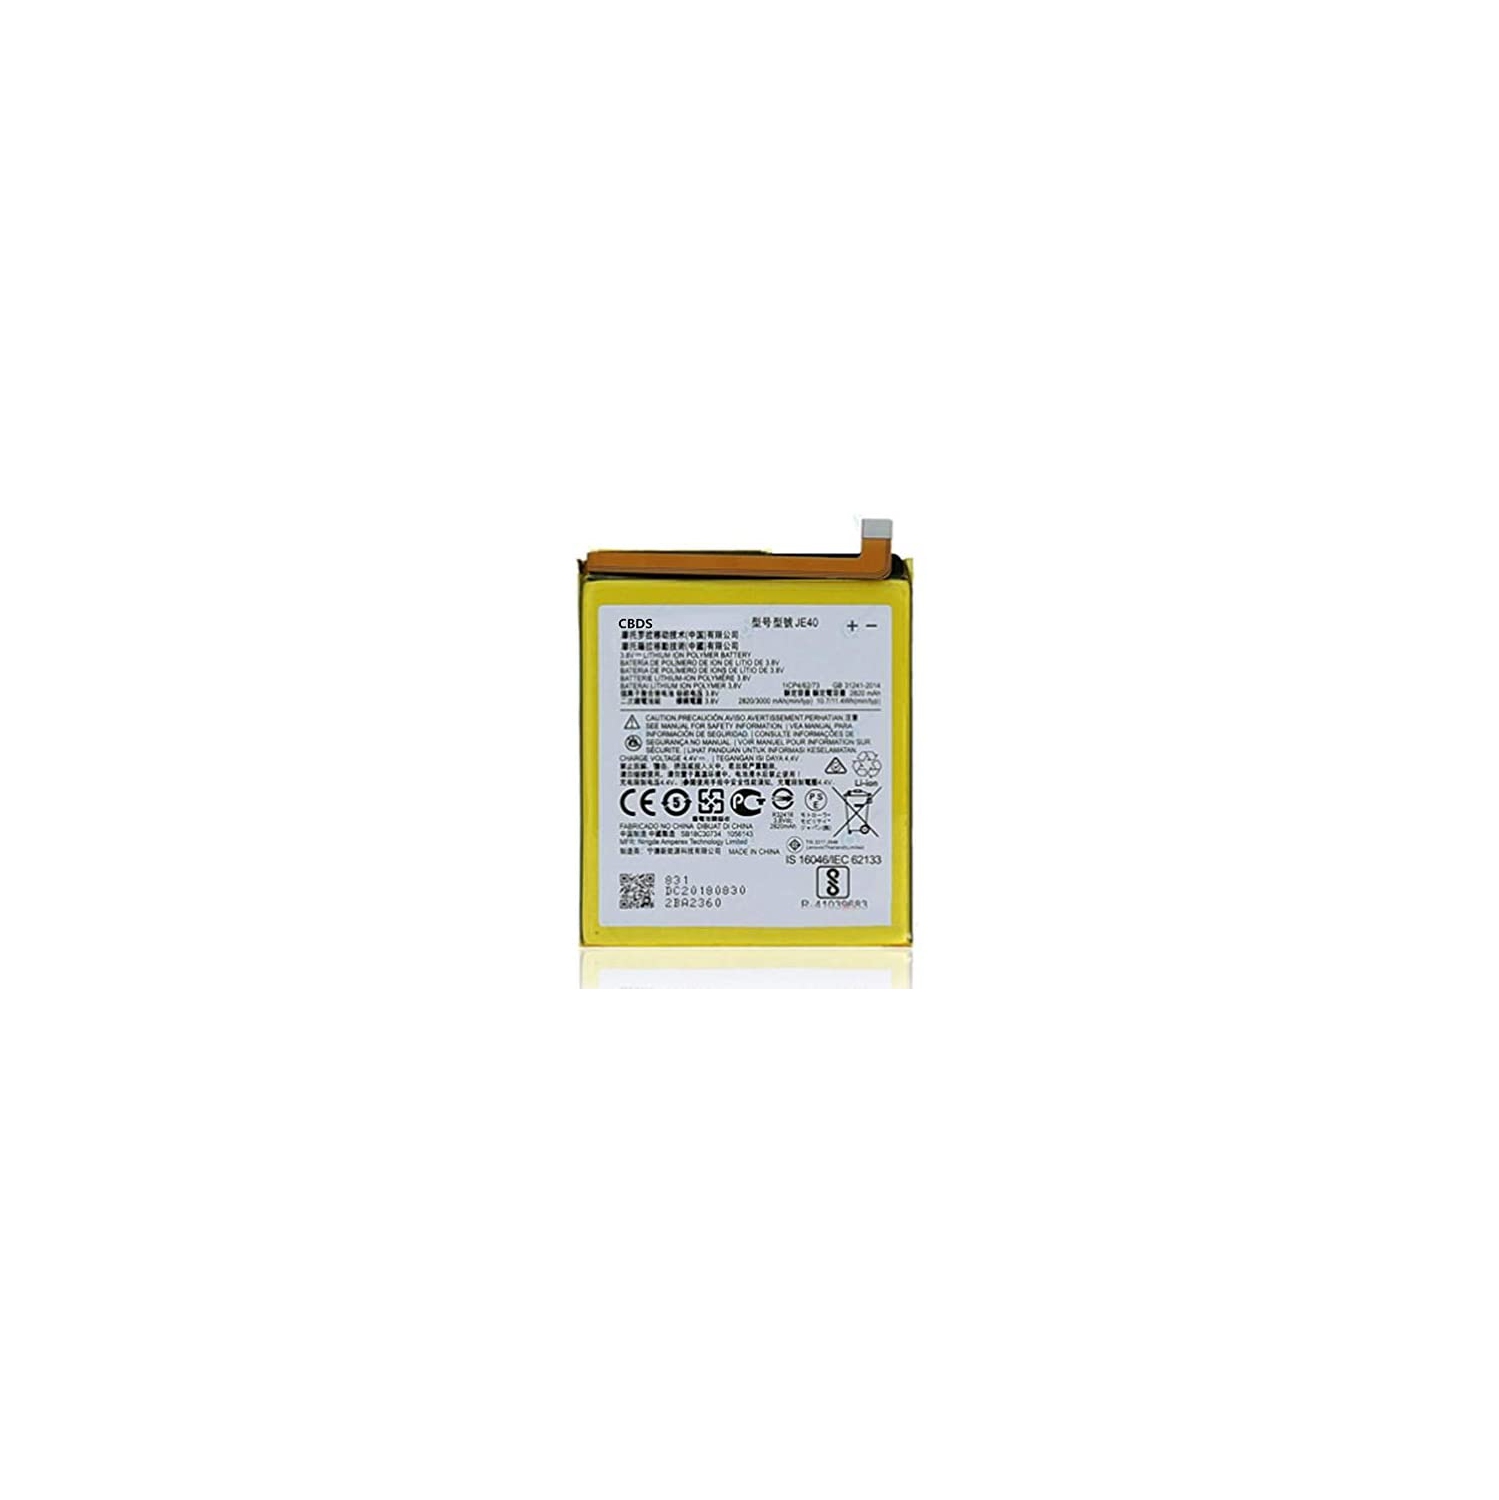 (CBDS) 2820mAh, 10.7 Wh Replacement Battery - Compatible with Motorola G7 Play G7 ONE ONE P30 Play XT1952 XT1952-1